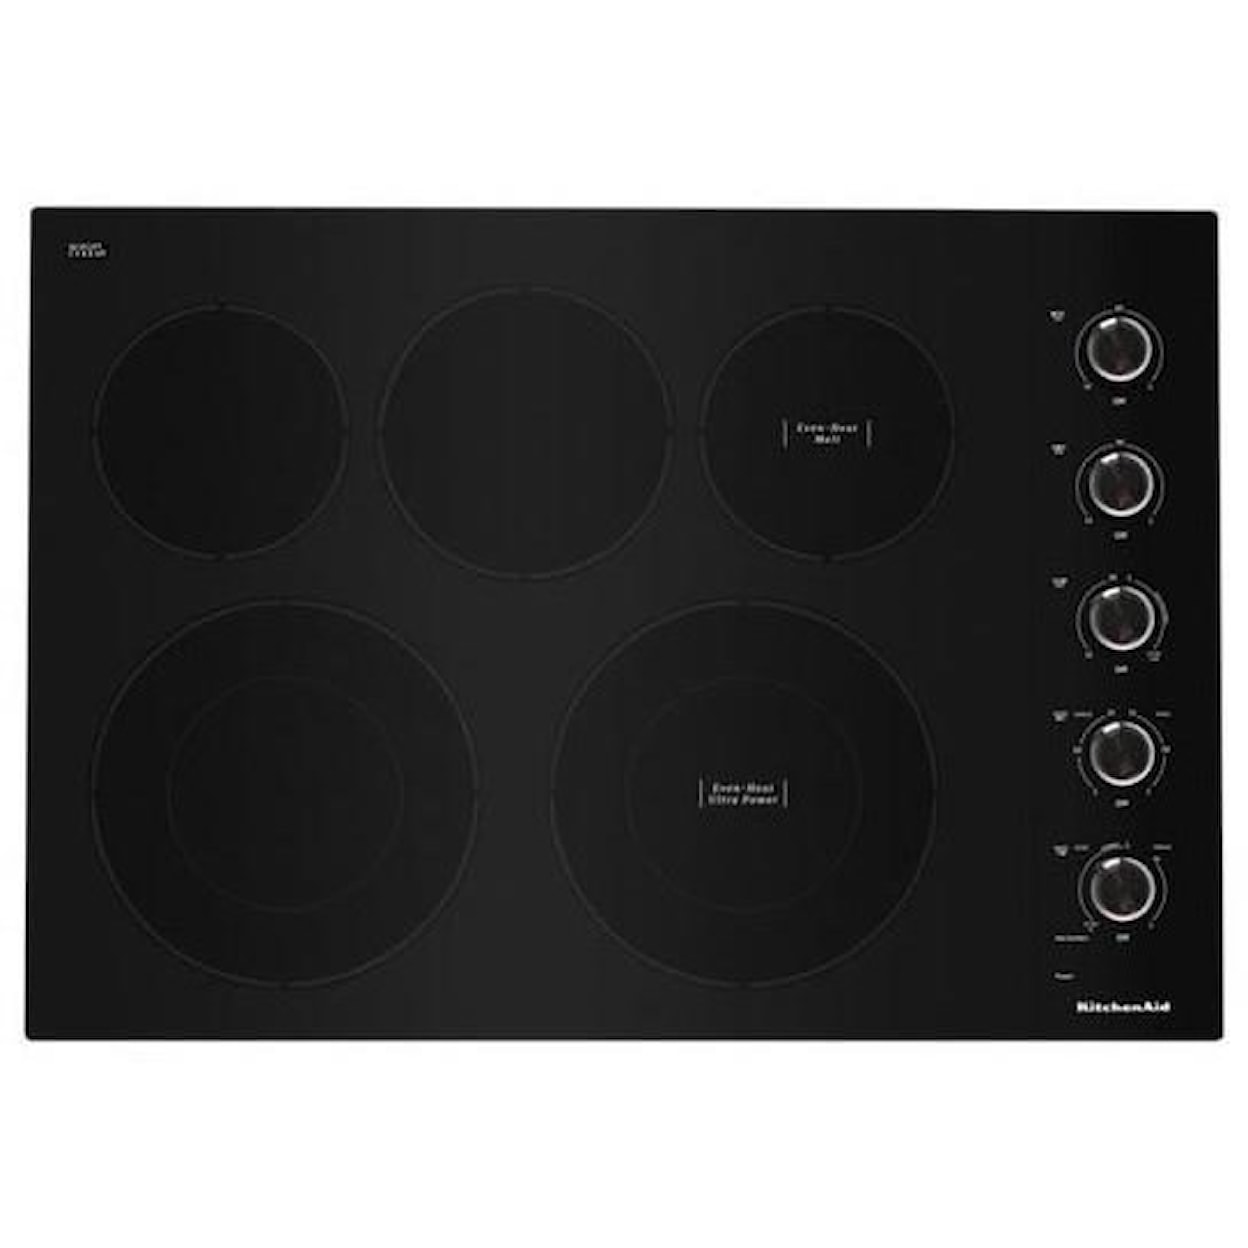 KitchenAid Electric Cooktops 30" Electric Cooktop with 5 Elements